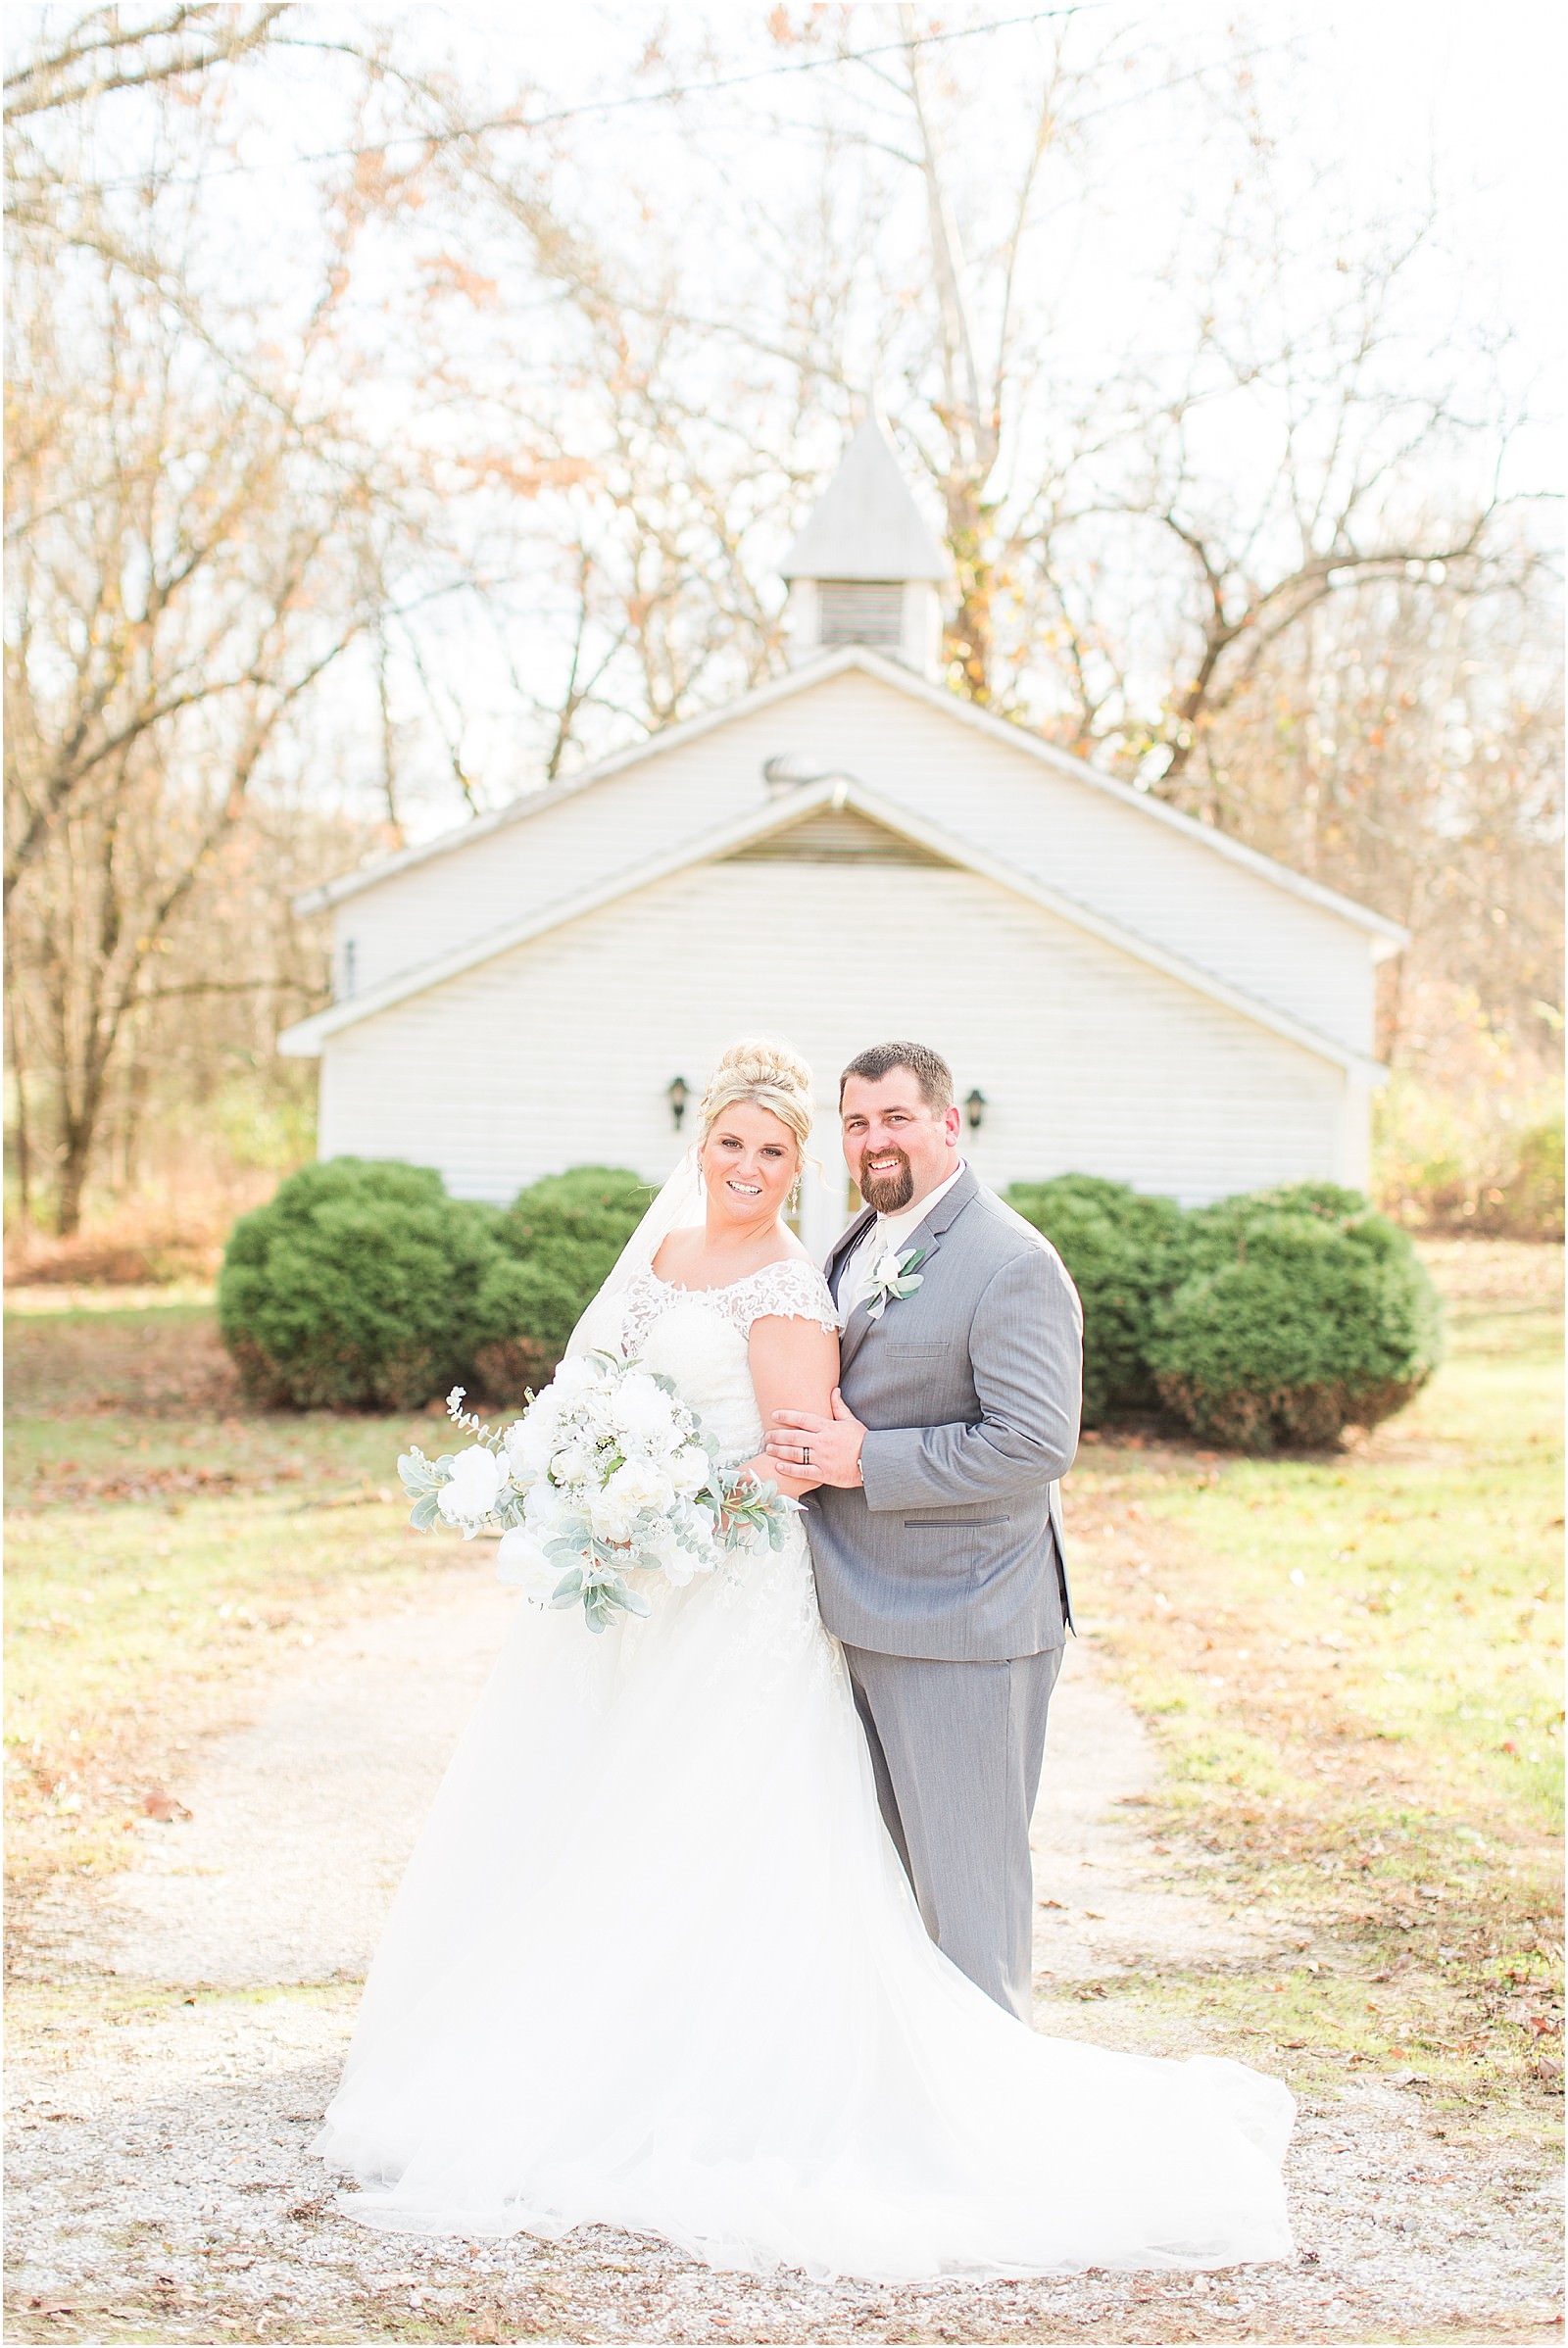 A Navy and Blush Wedding in Tell City Indiana | Brianna and Matt | Bret and Brandie Photography 0134.jpg